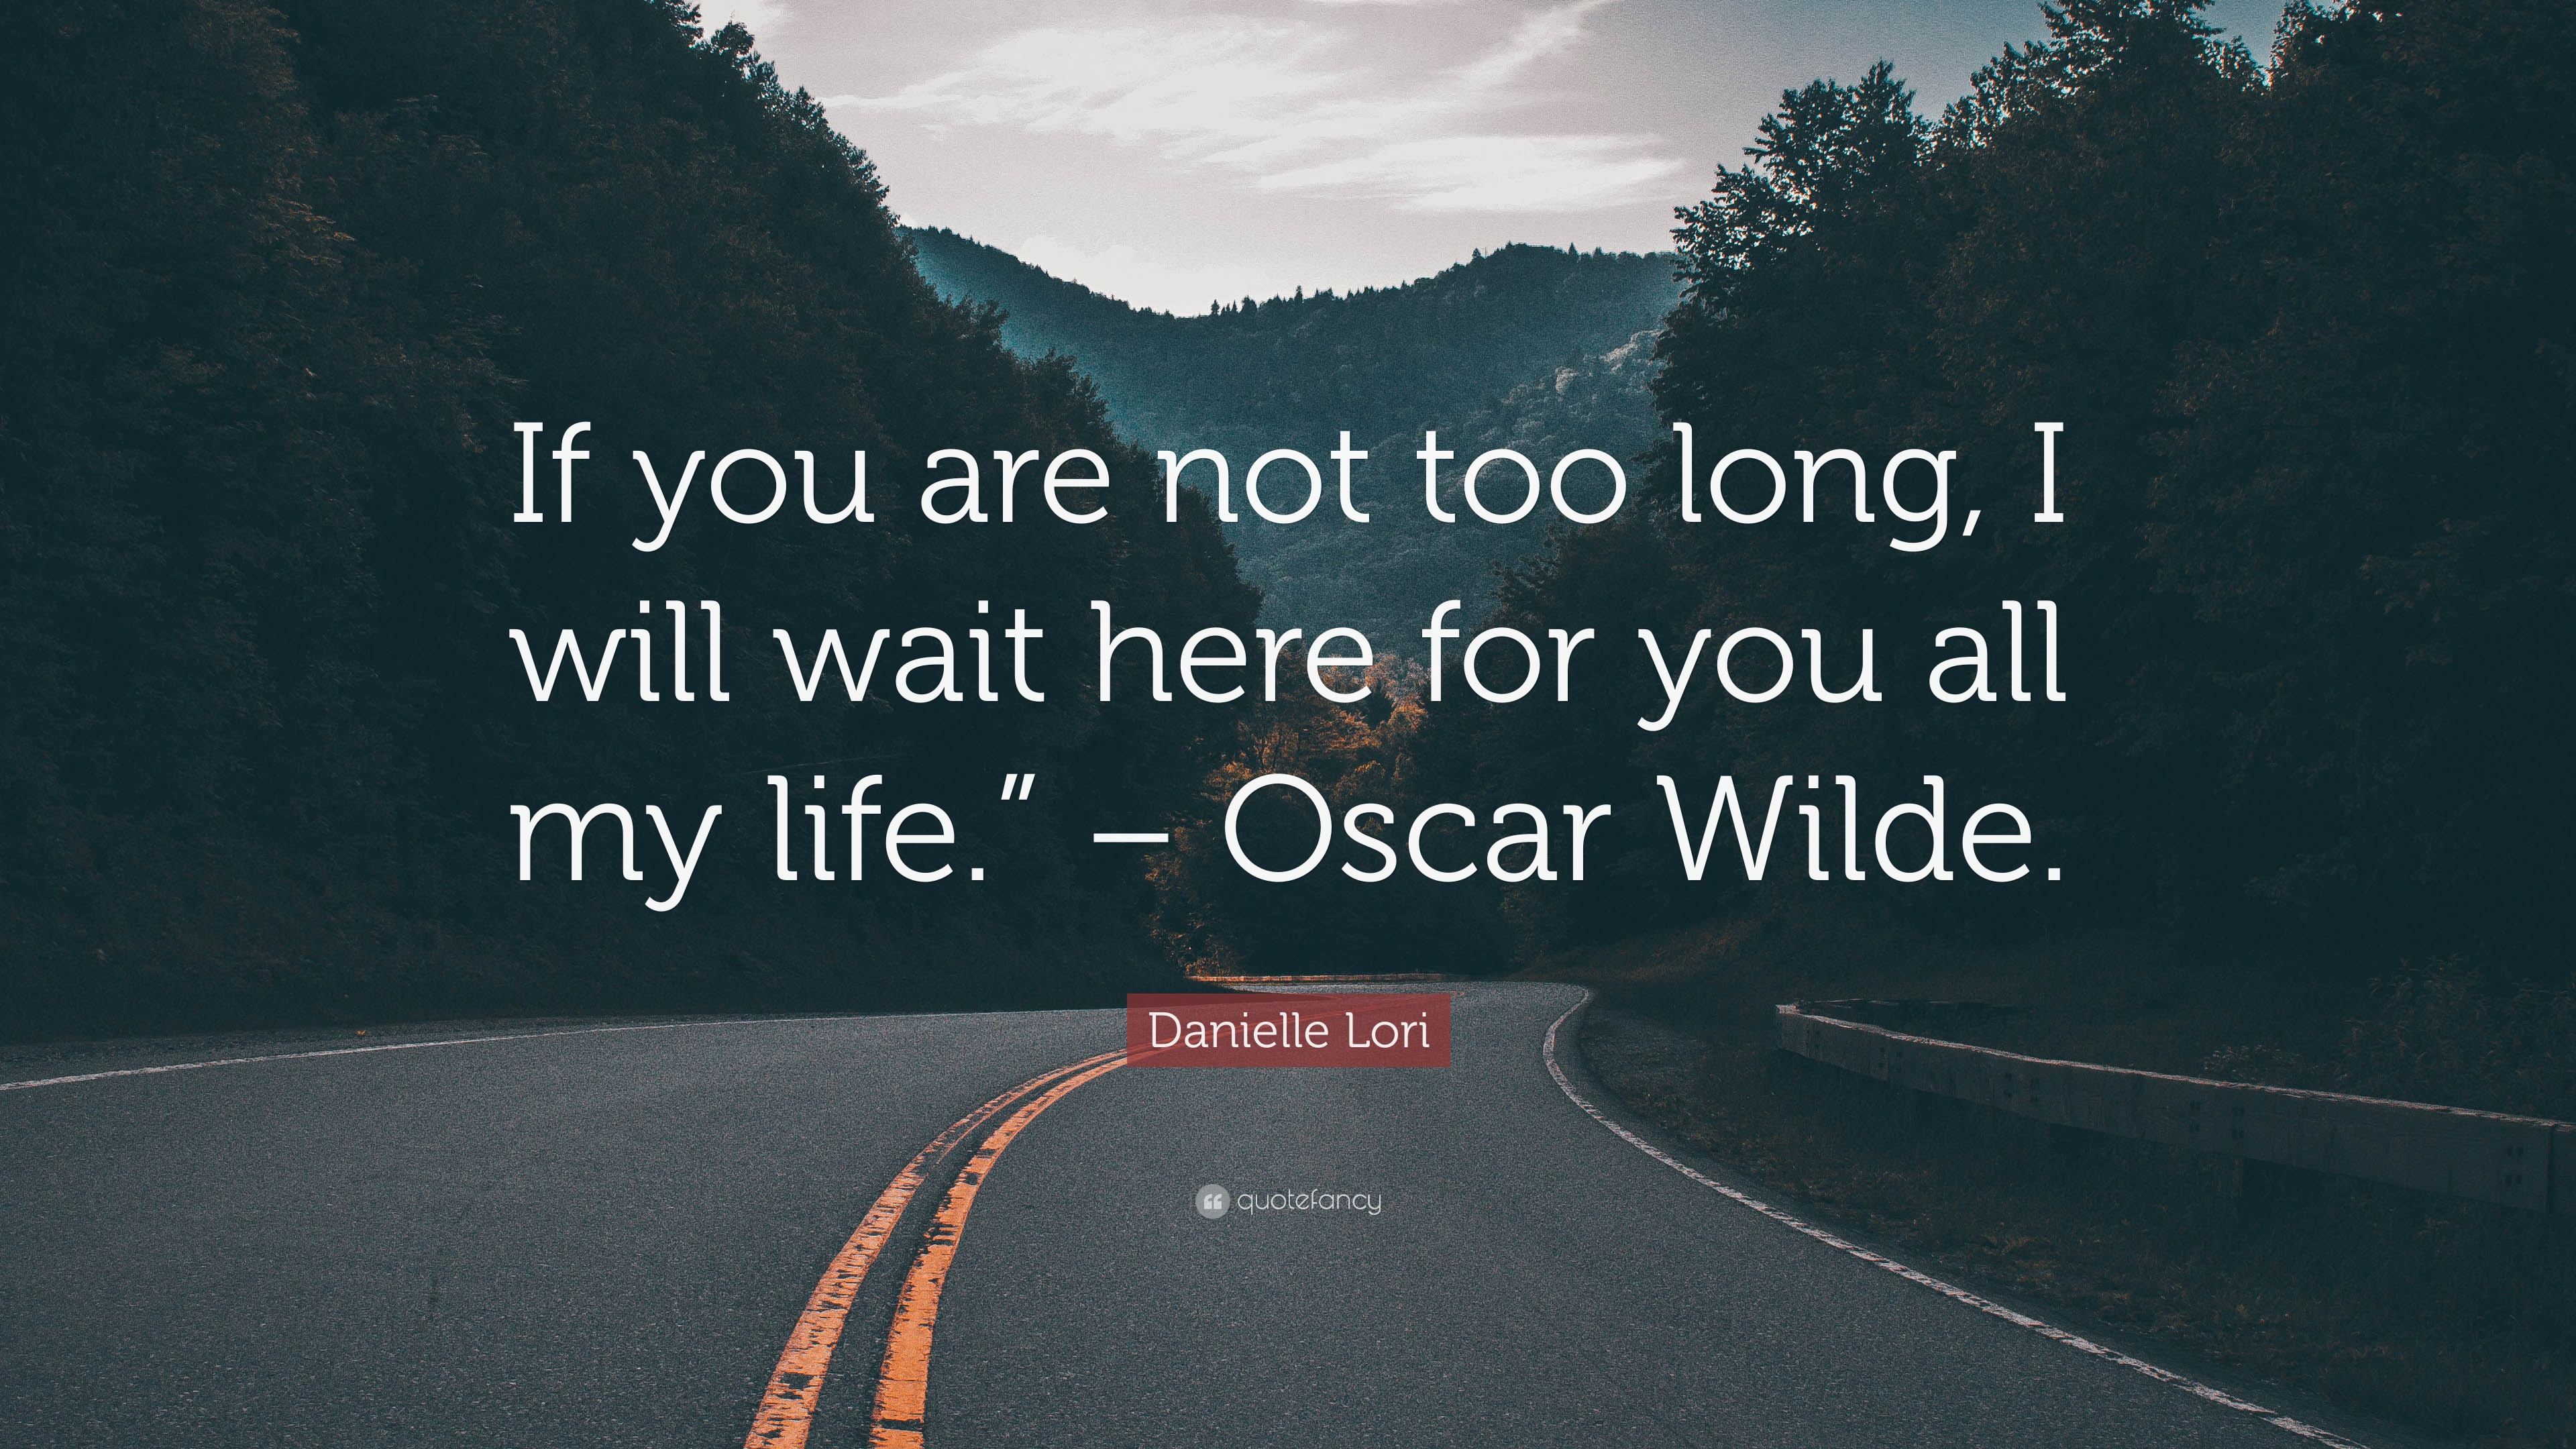 Oscar Wilde - If you are not too long, I will wait here